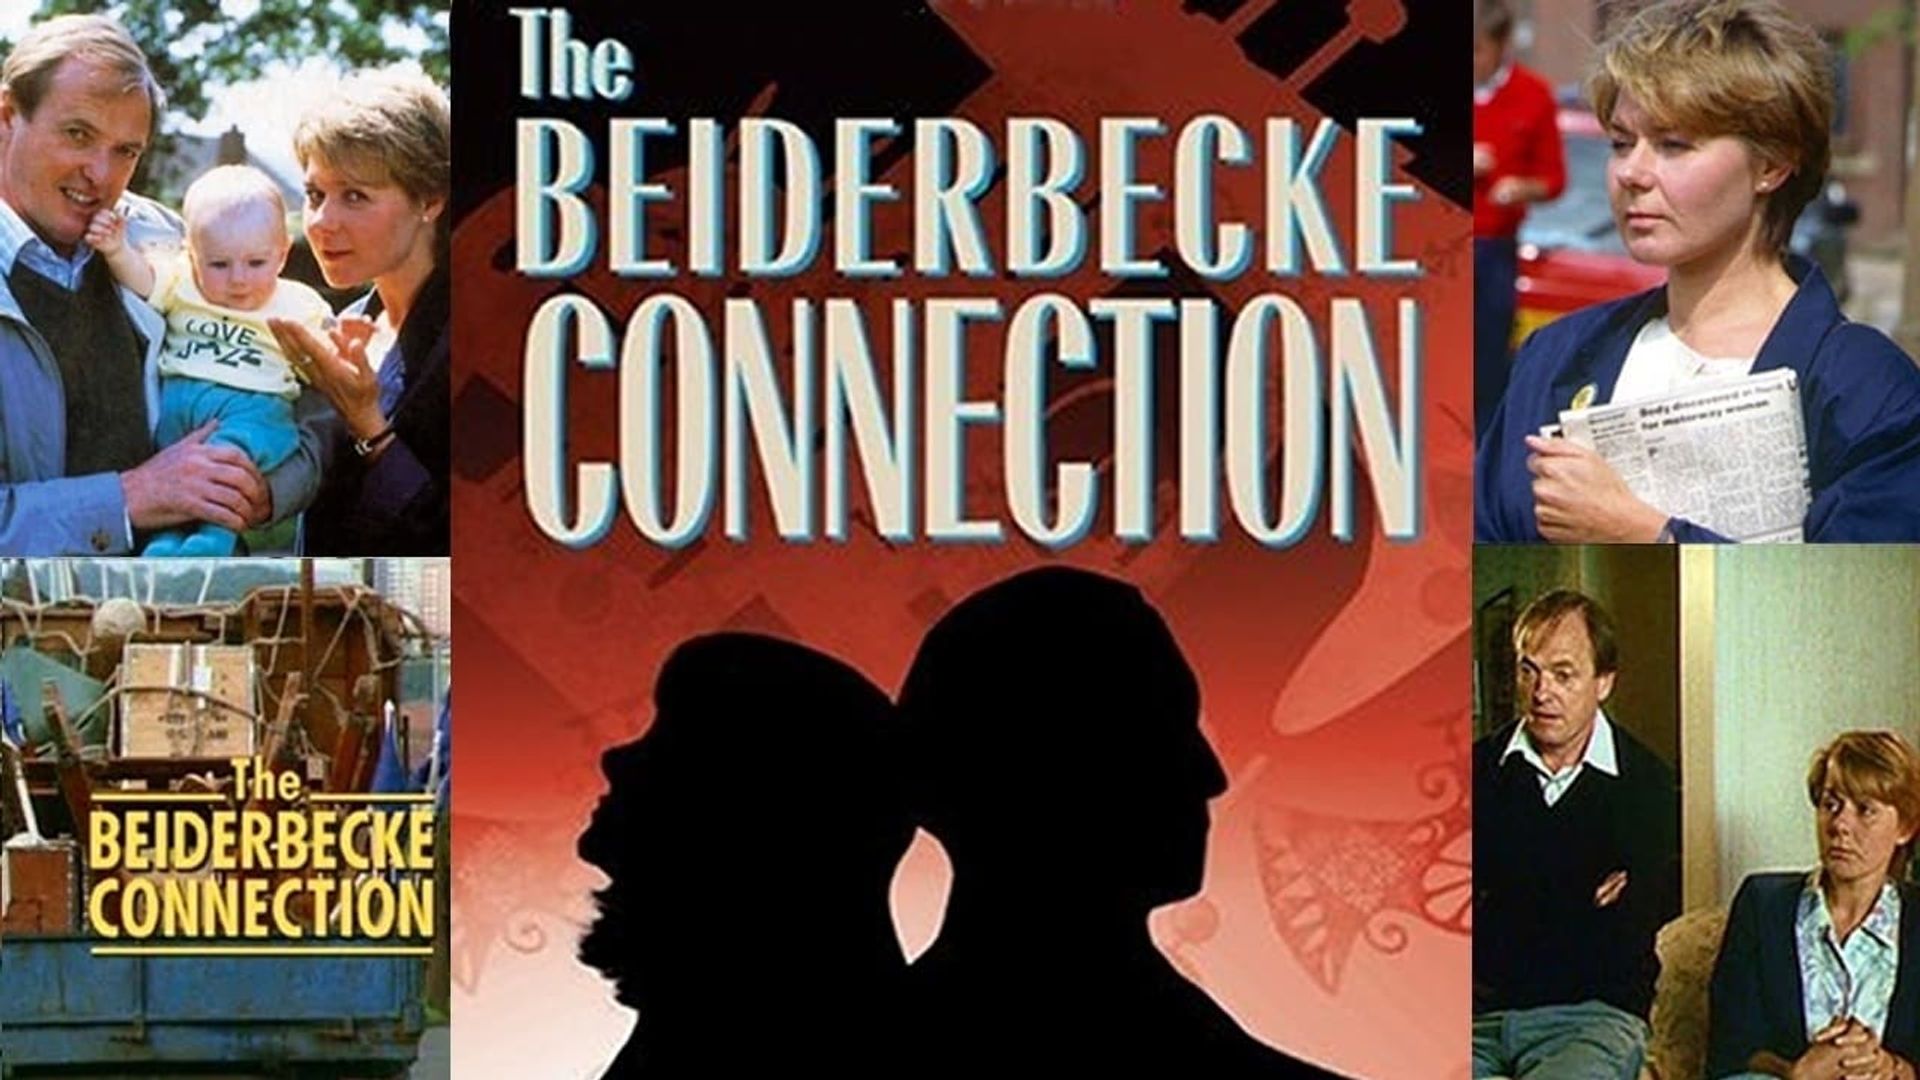 The Beiderbecke Connection background